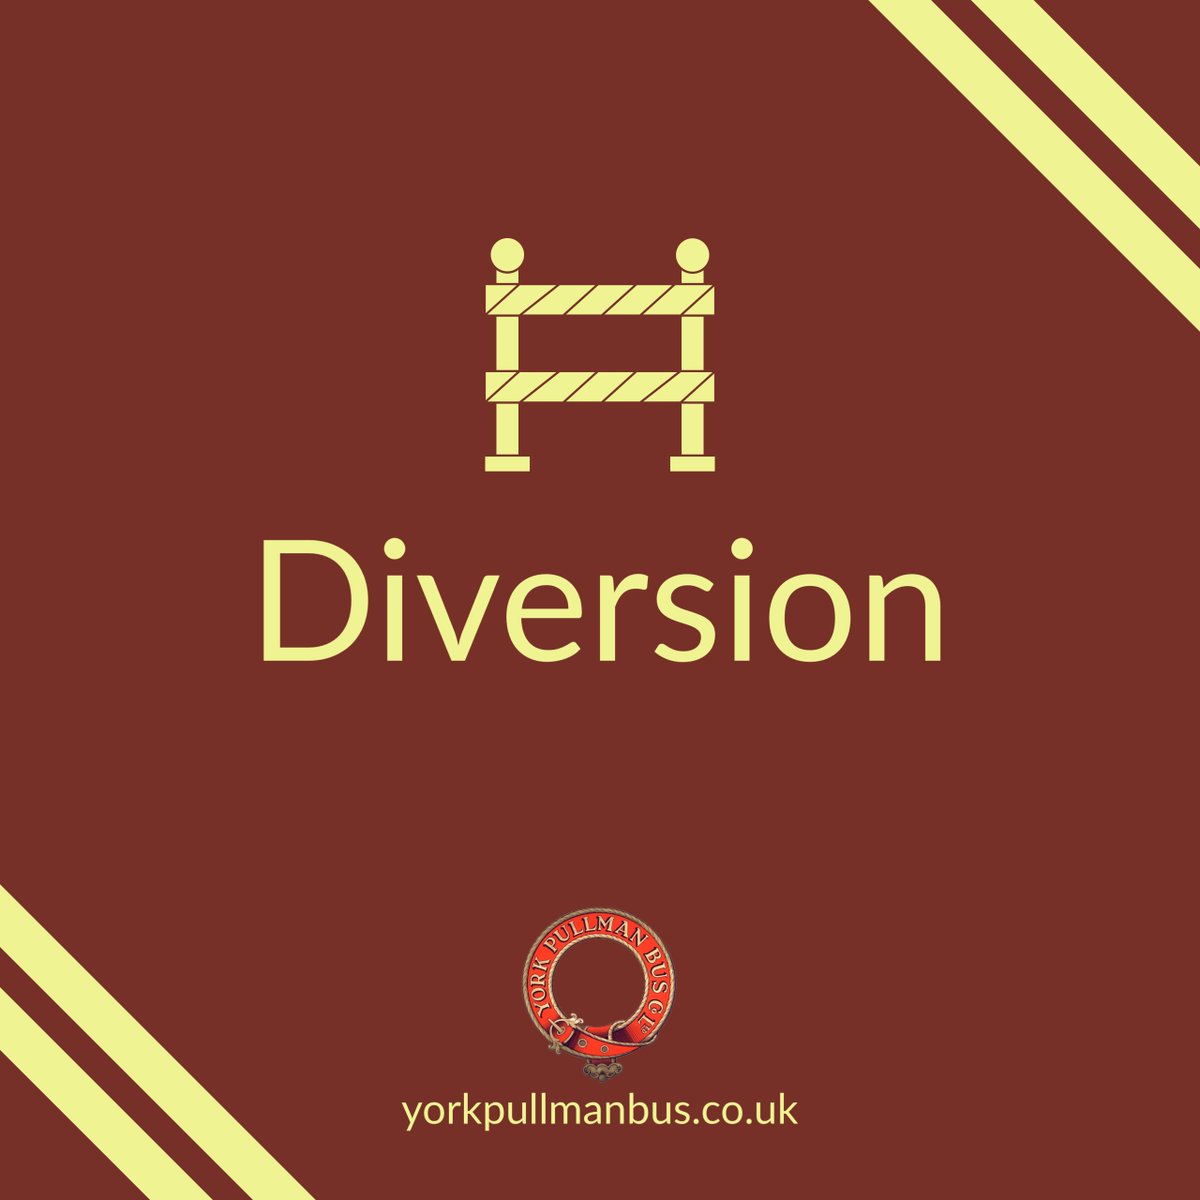 ⛔ Queen Street (#York Rail Station) is closed from 8pm Fri 26th April - 6am Mon 29th April. ⚠️ Disruption to My21, My36 & My37. A free shuttle bus (YSS) will operate between Blossom St, Nunnery Ln, Tower St, Clifford St, Rougier St and York Station. ℹ️ yorkpullmanbus.co.uk/news/service-u…